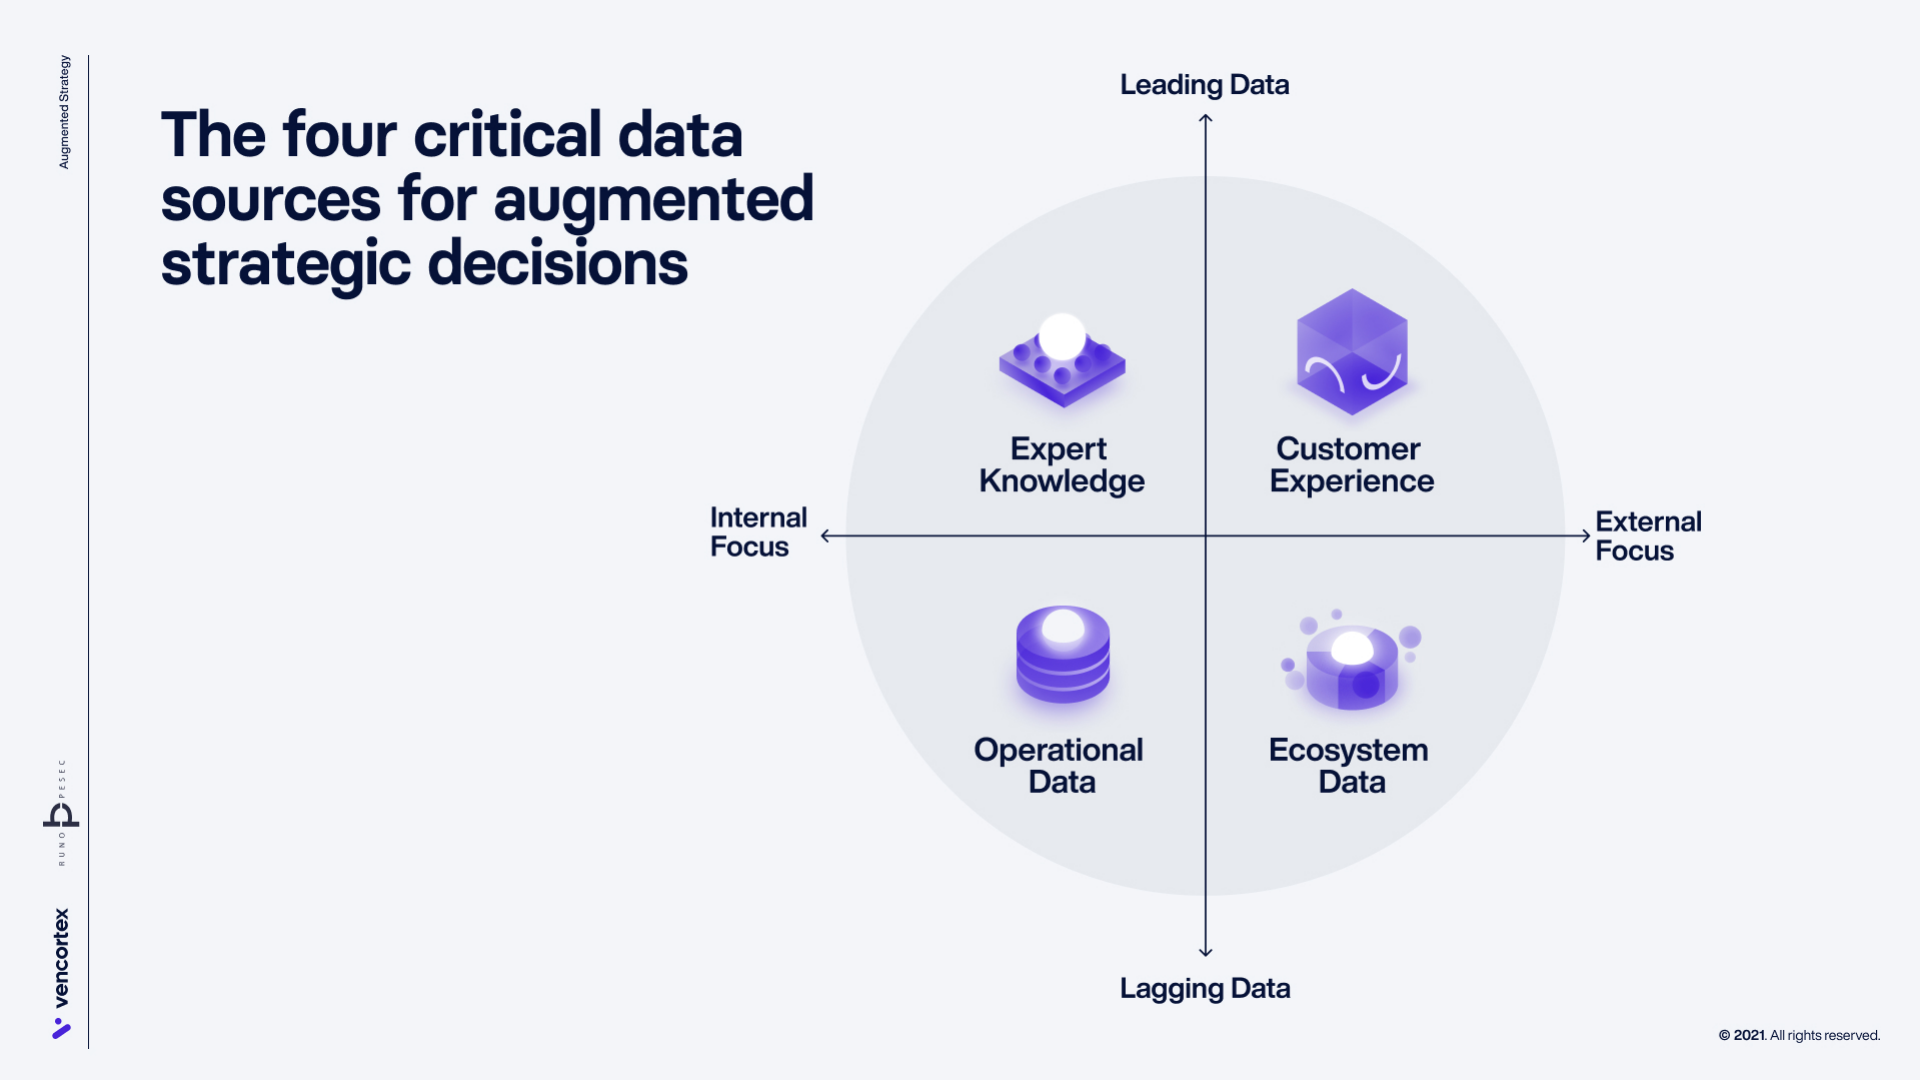 The four critical data sources for augmented strategic decisions. Copyright © 2021 Bruno Pešec and Dominik Dellermann. All rights reserved.